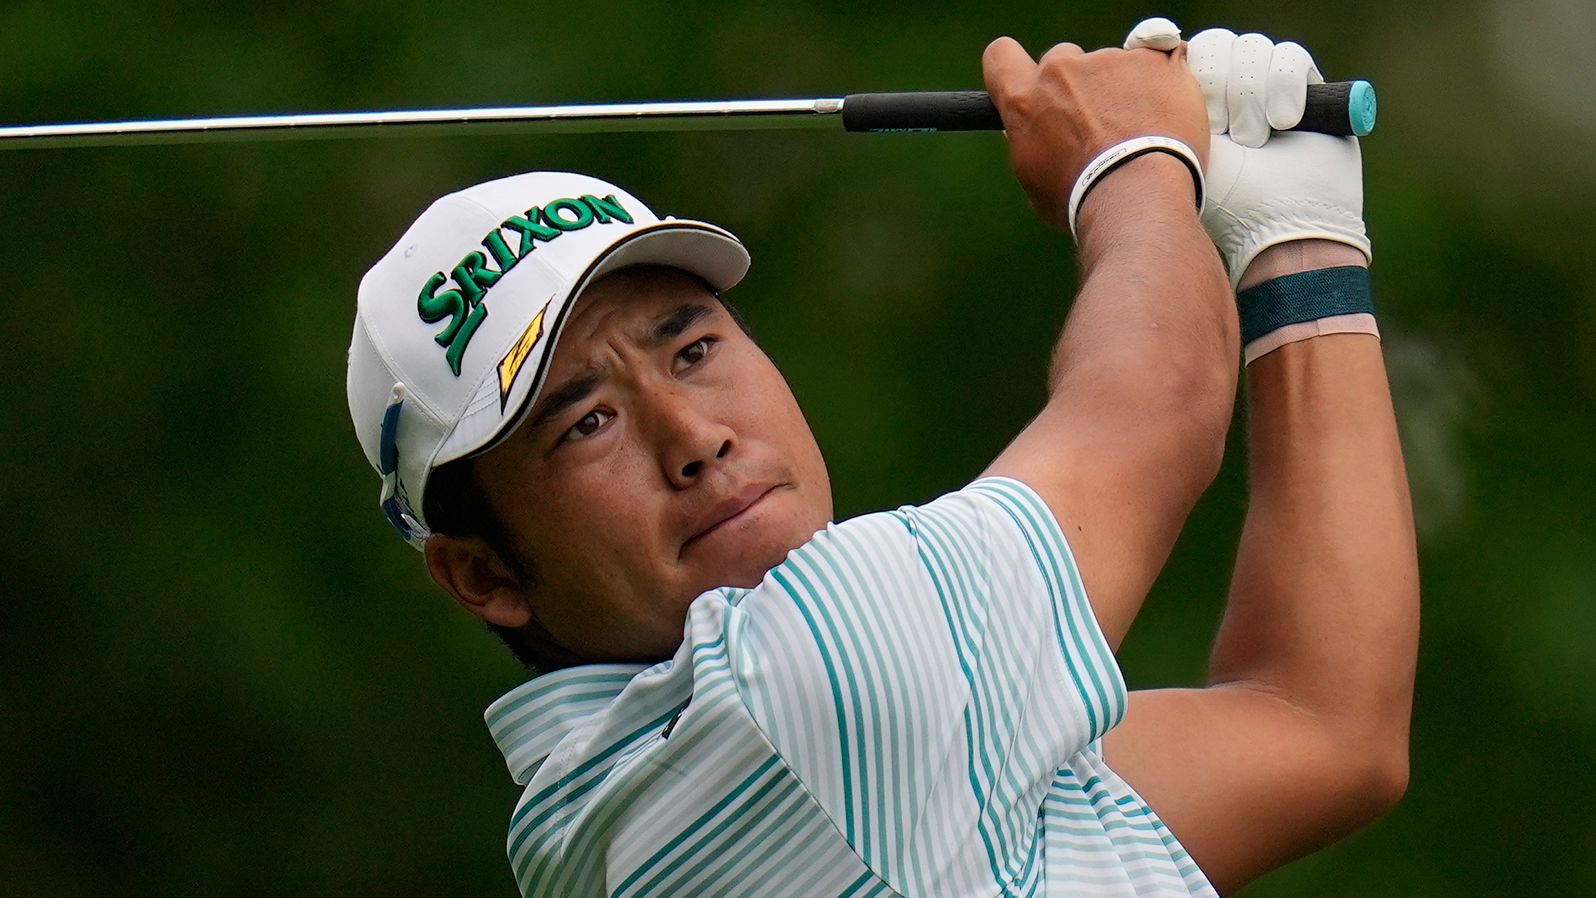 Matsuyama finished with a 7-under 65 on Saturday to take a four-shot lead into Sunday's final round.